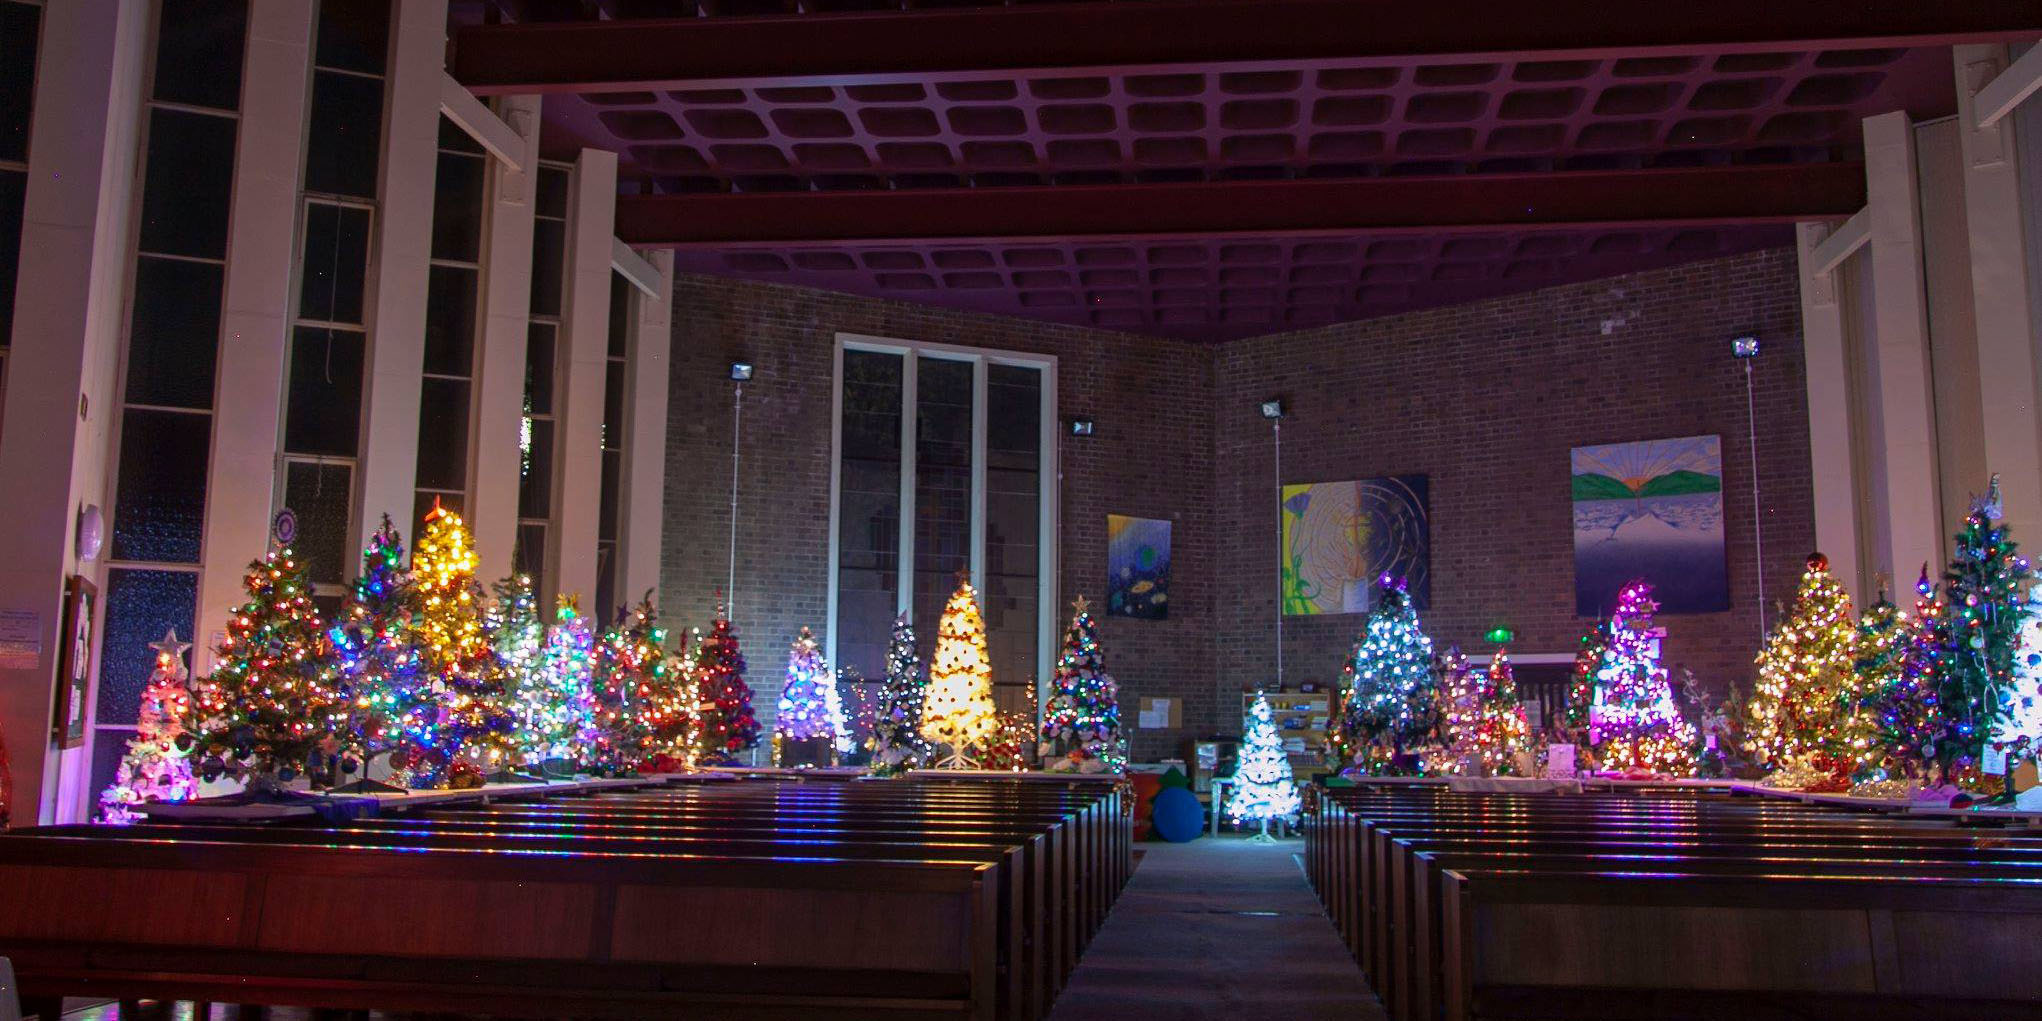 Interior of Old Brumby Church at night full of pretty Christmas trees with colourful lights.